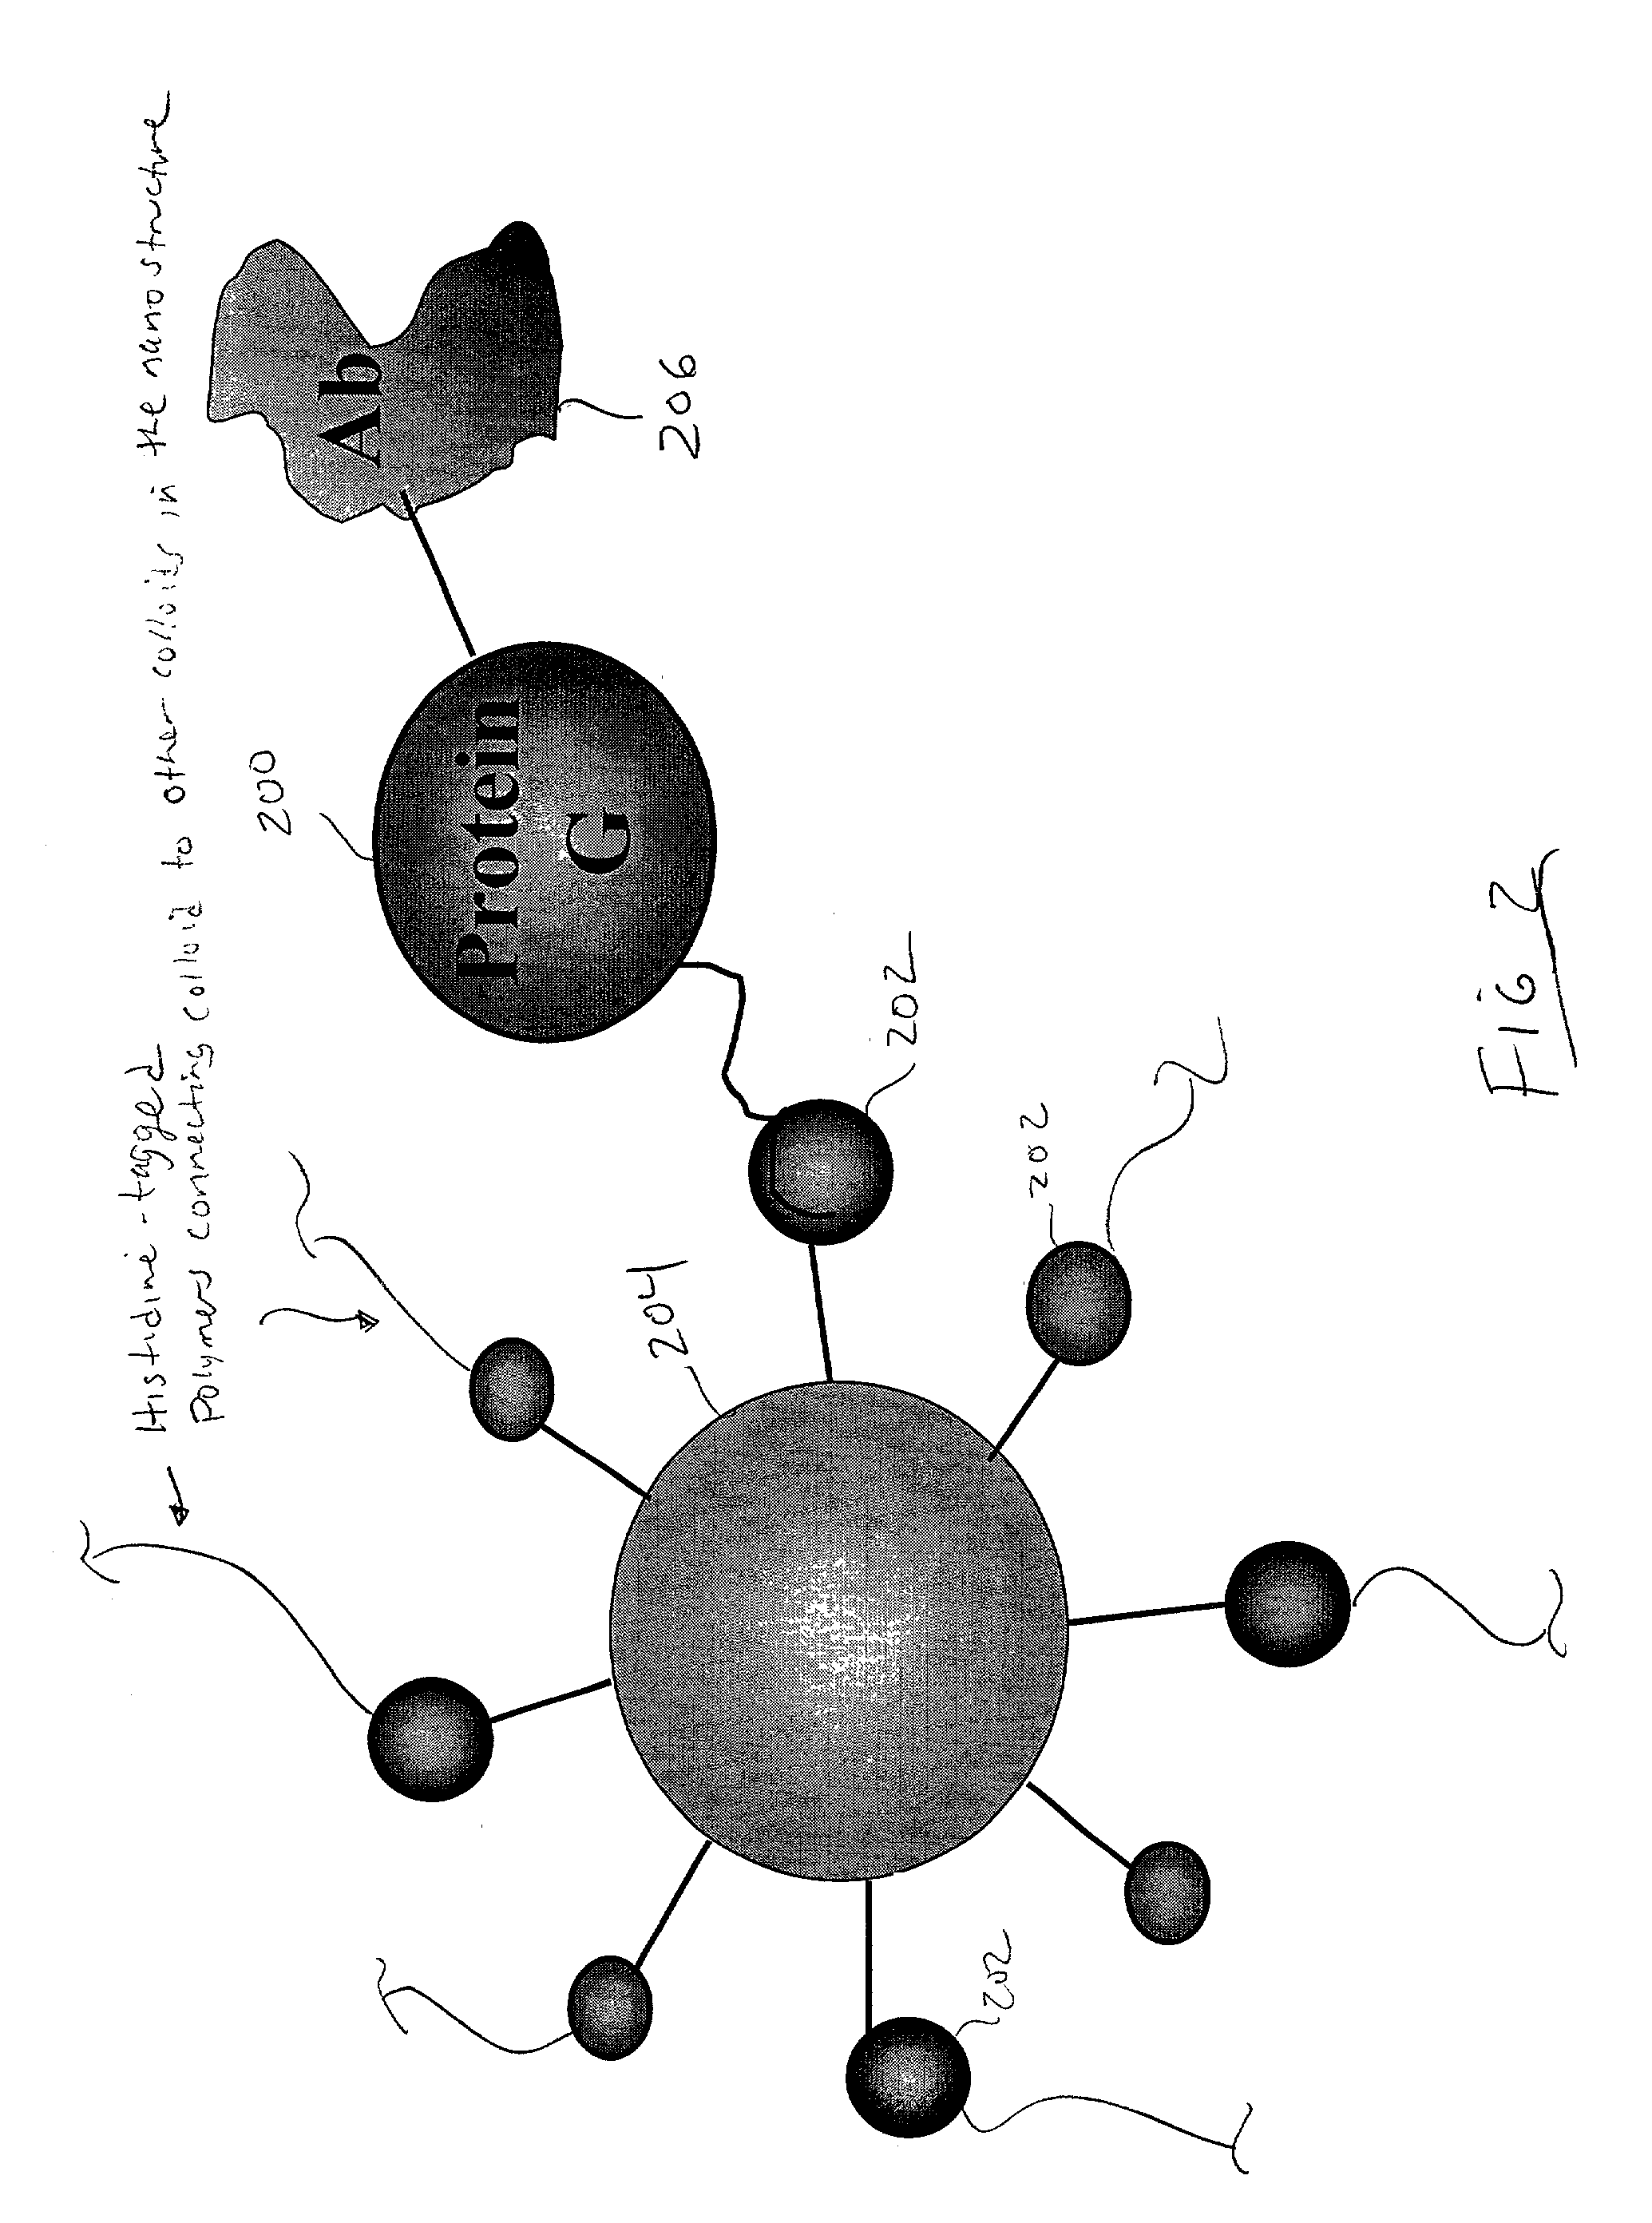 Electronic detection of interaction and detection of interaction based on the interruption of flow